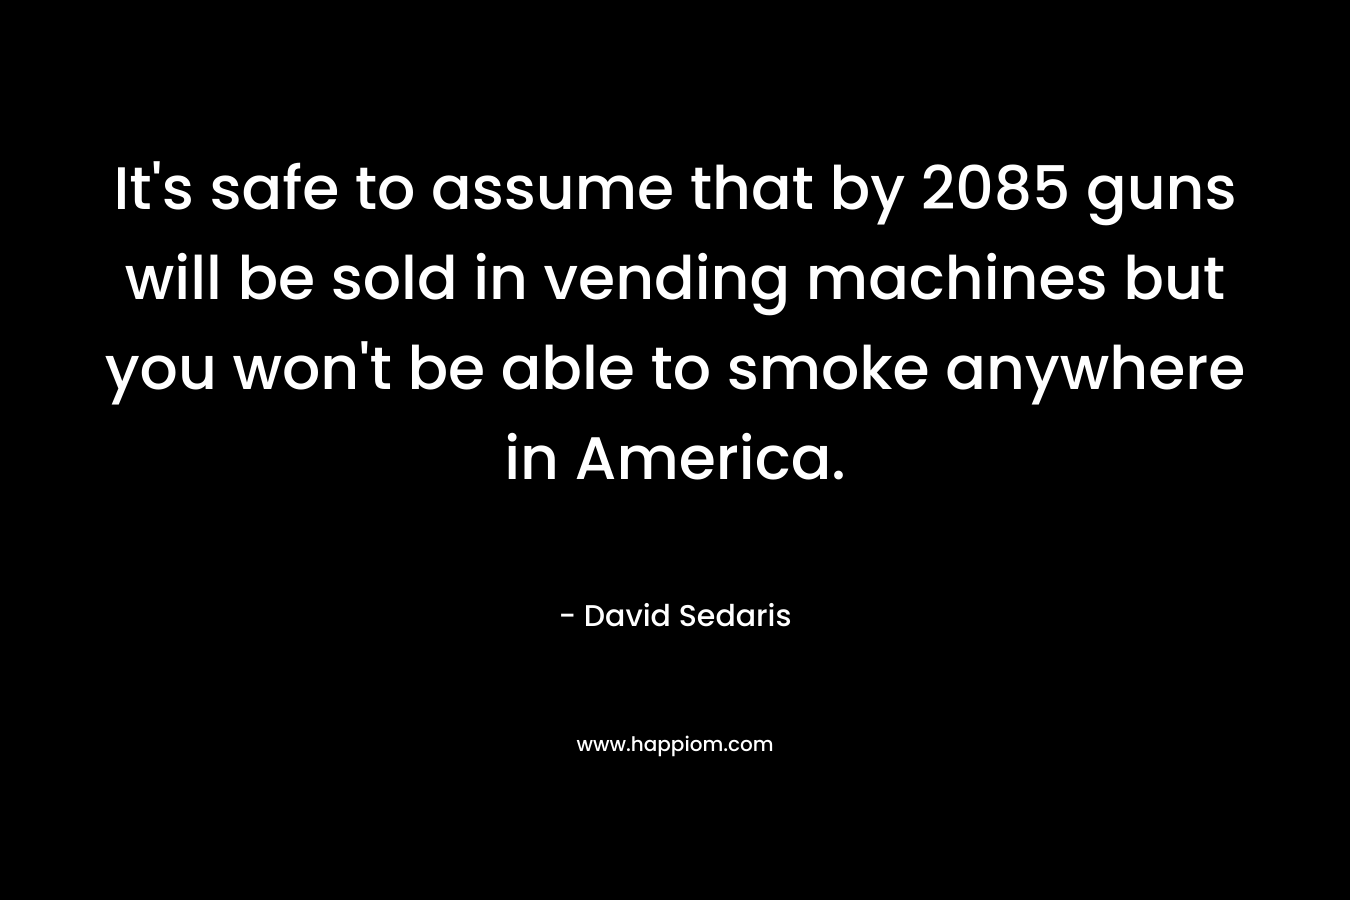 It’s safe to assume that by 2085 guns will be sold in vending machines but you won’t be able to smoke anywhere in America. – David Sedaris